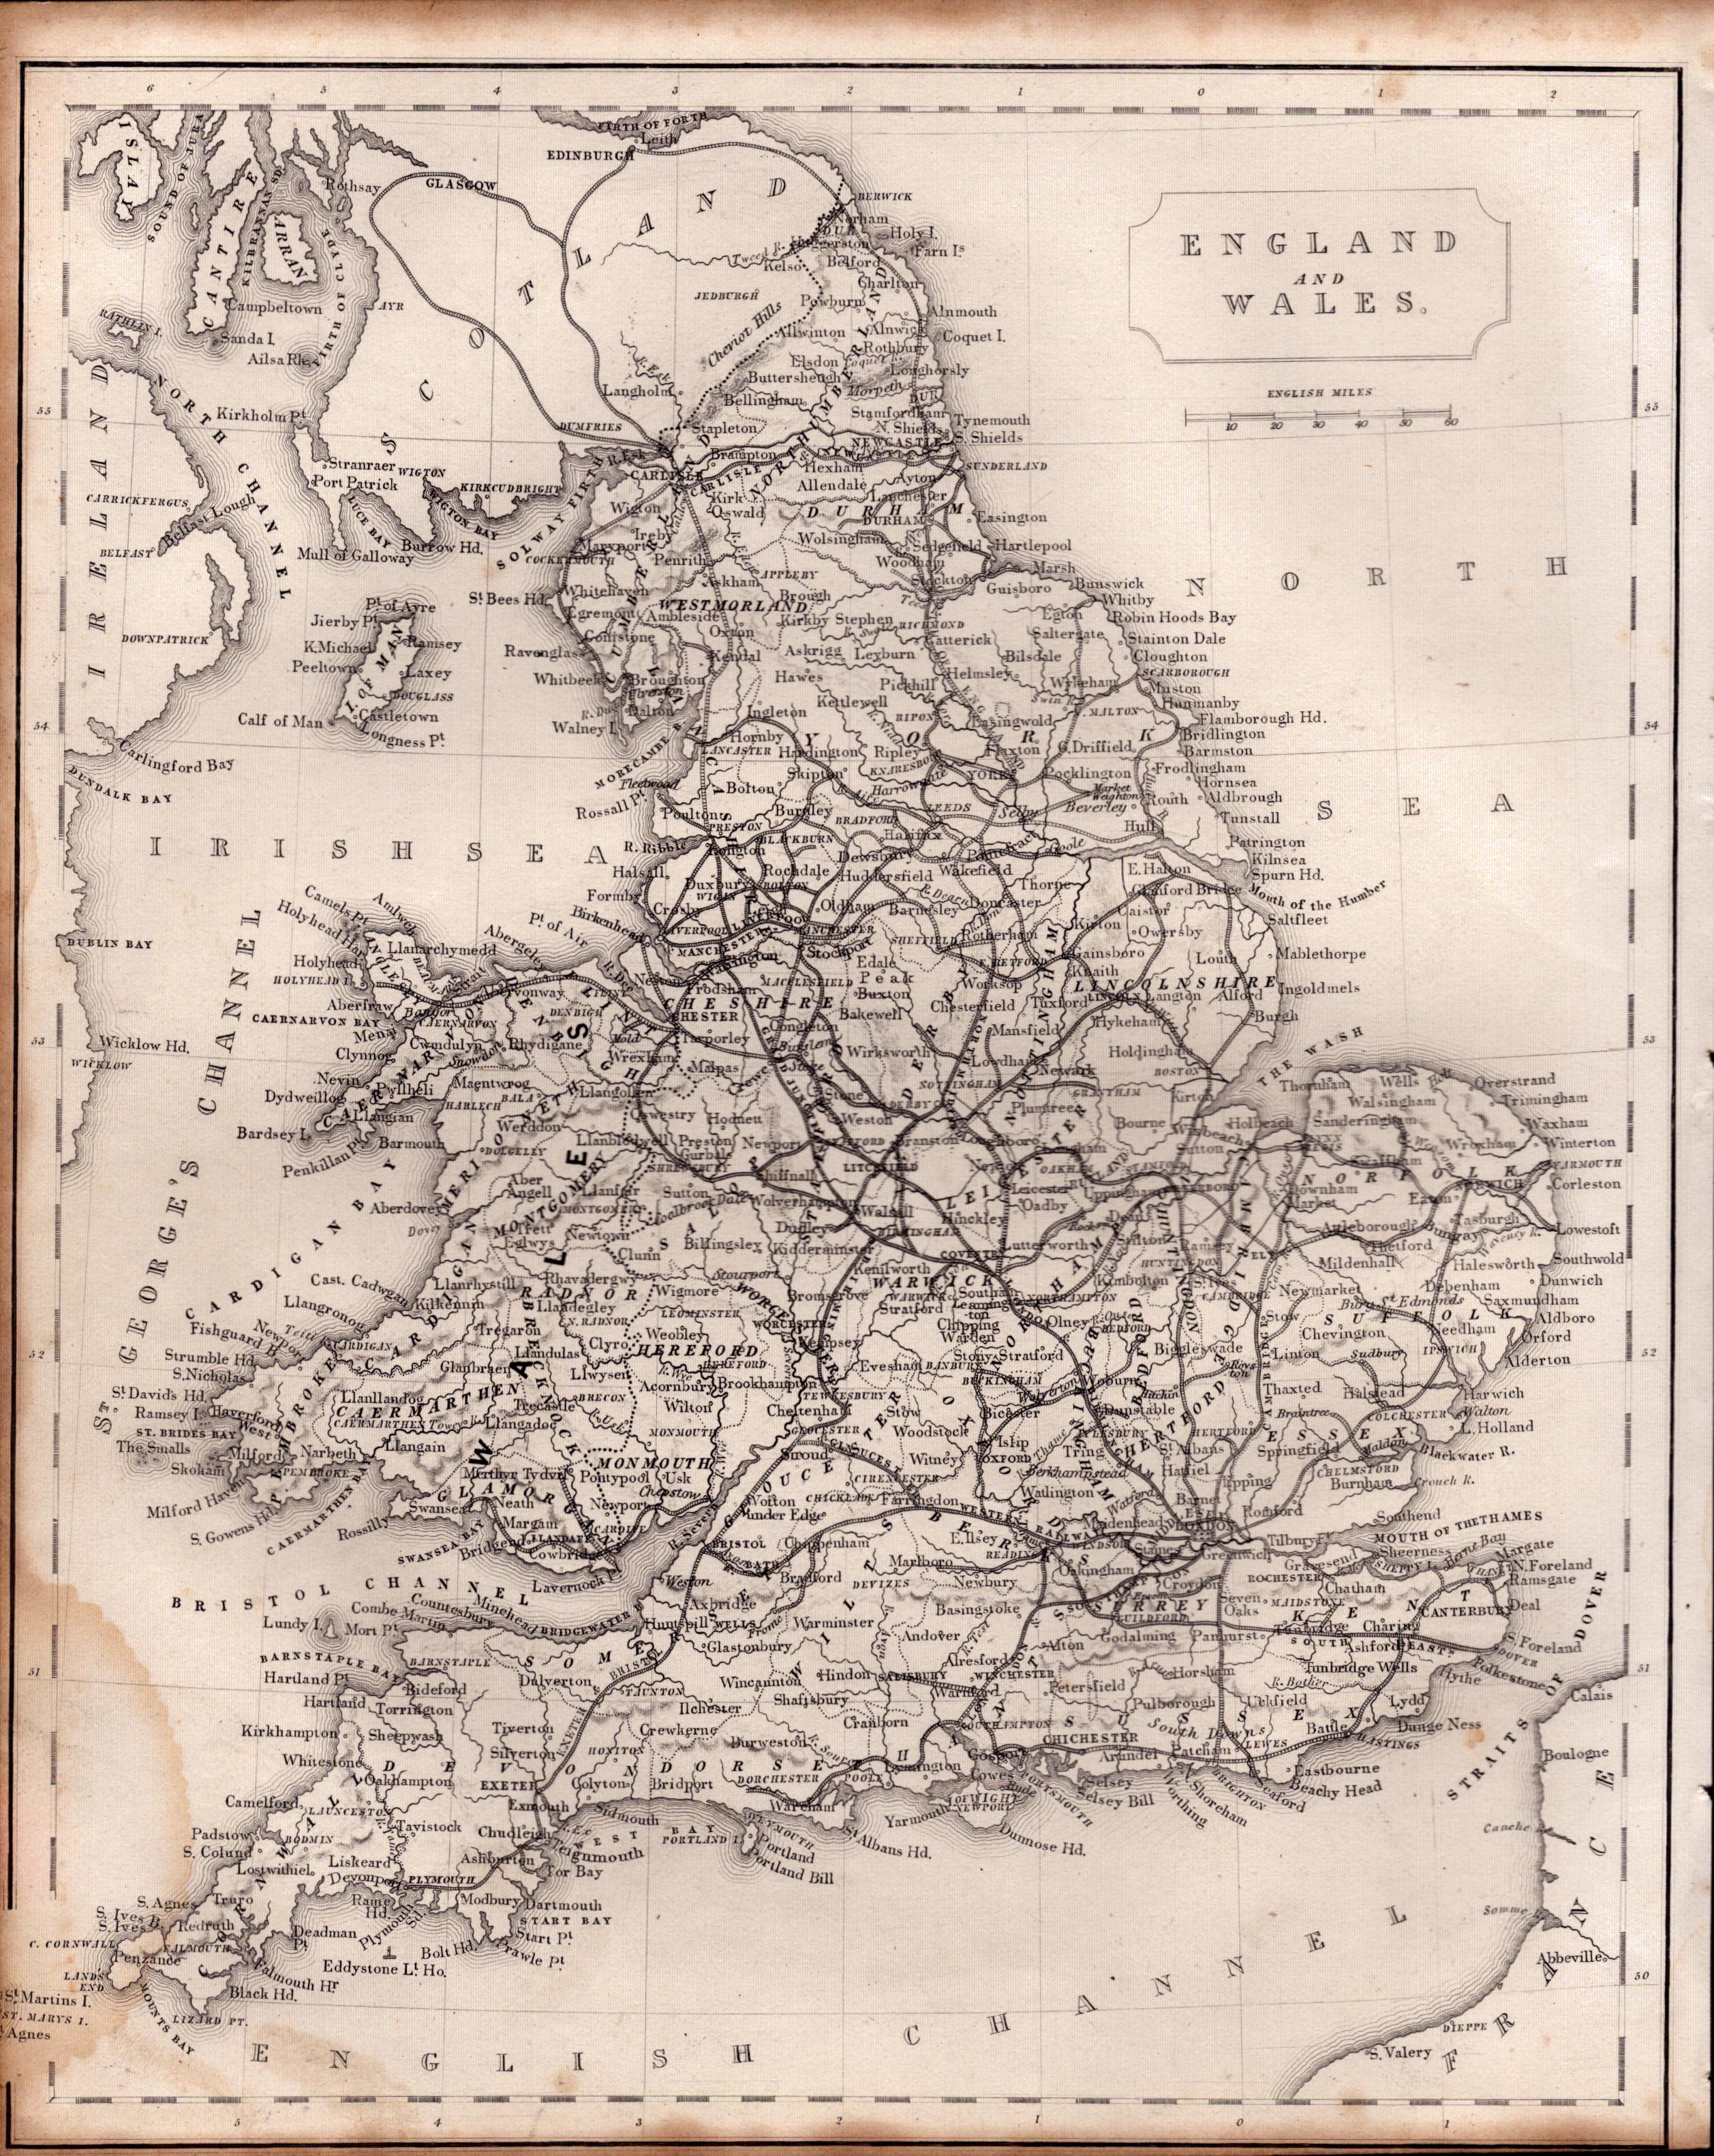 England & Wales Steel Engraved Victorian Thomas Moule Map.